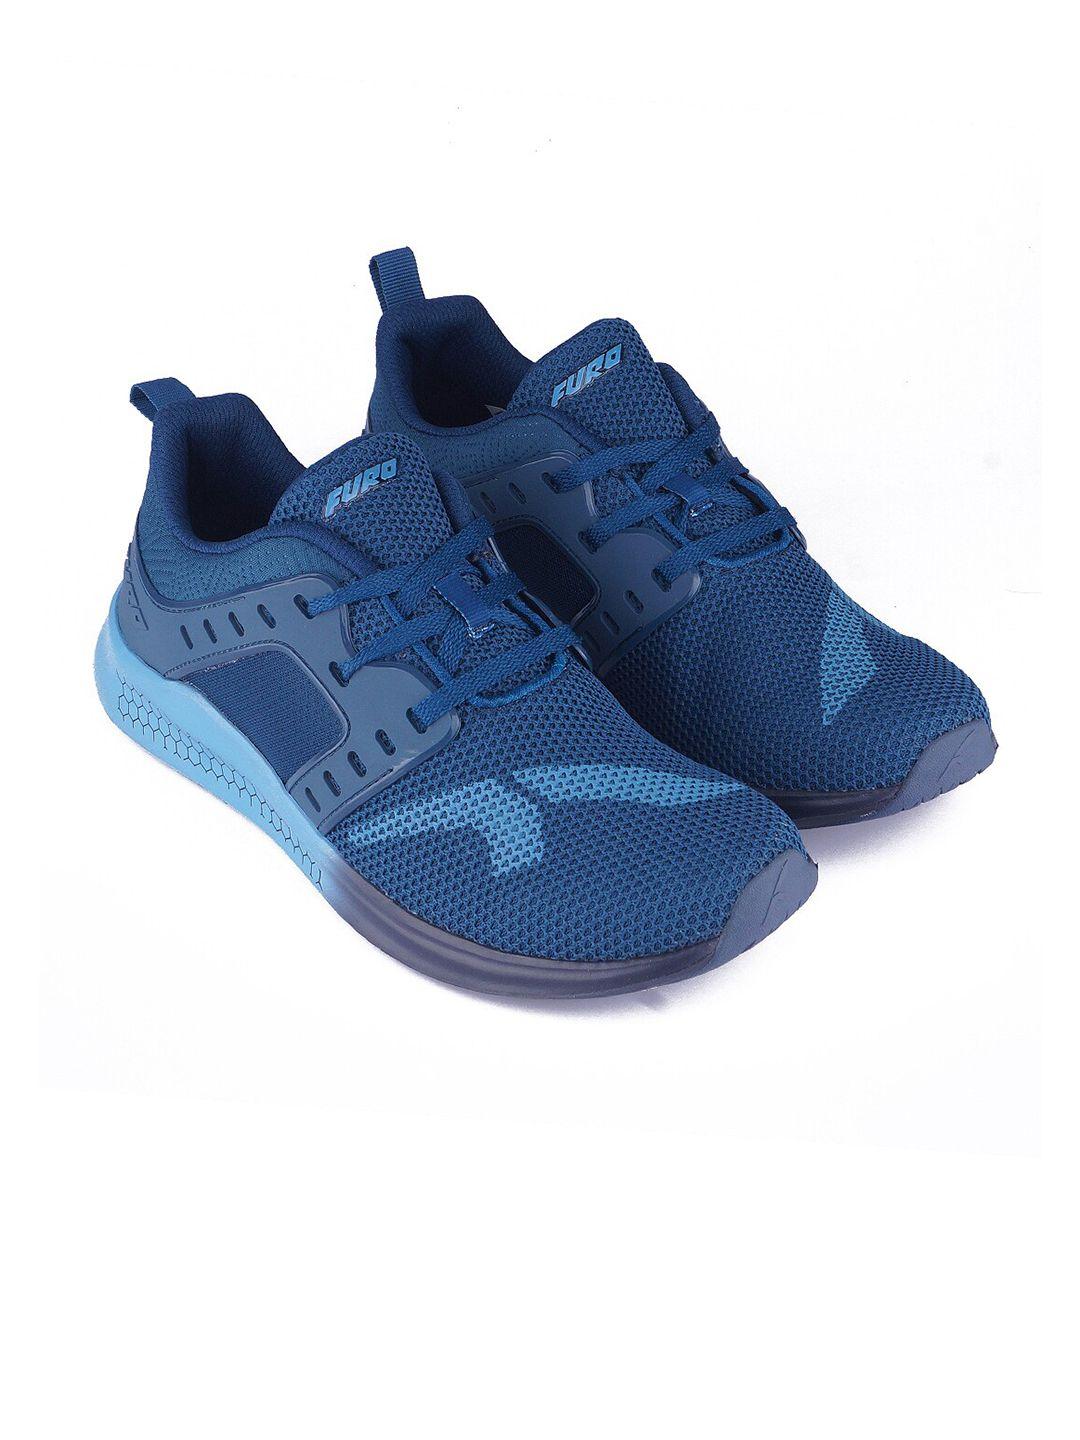 furo by red chief men dri-fit mesh running non-marking sports shoes